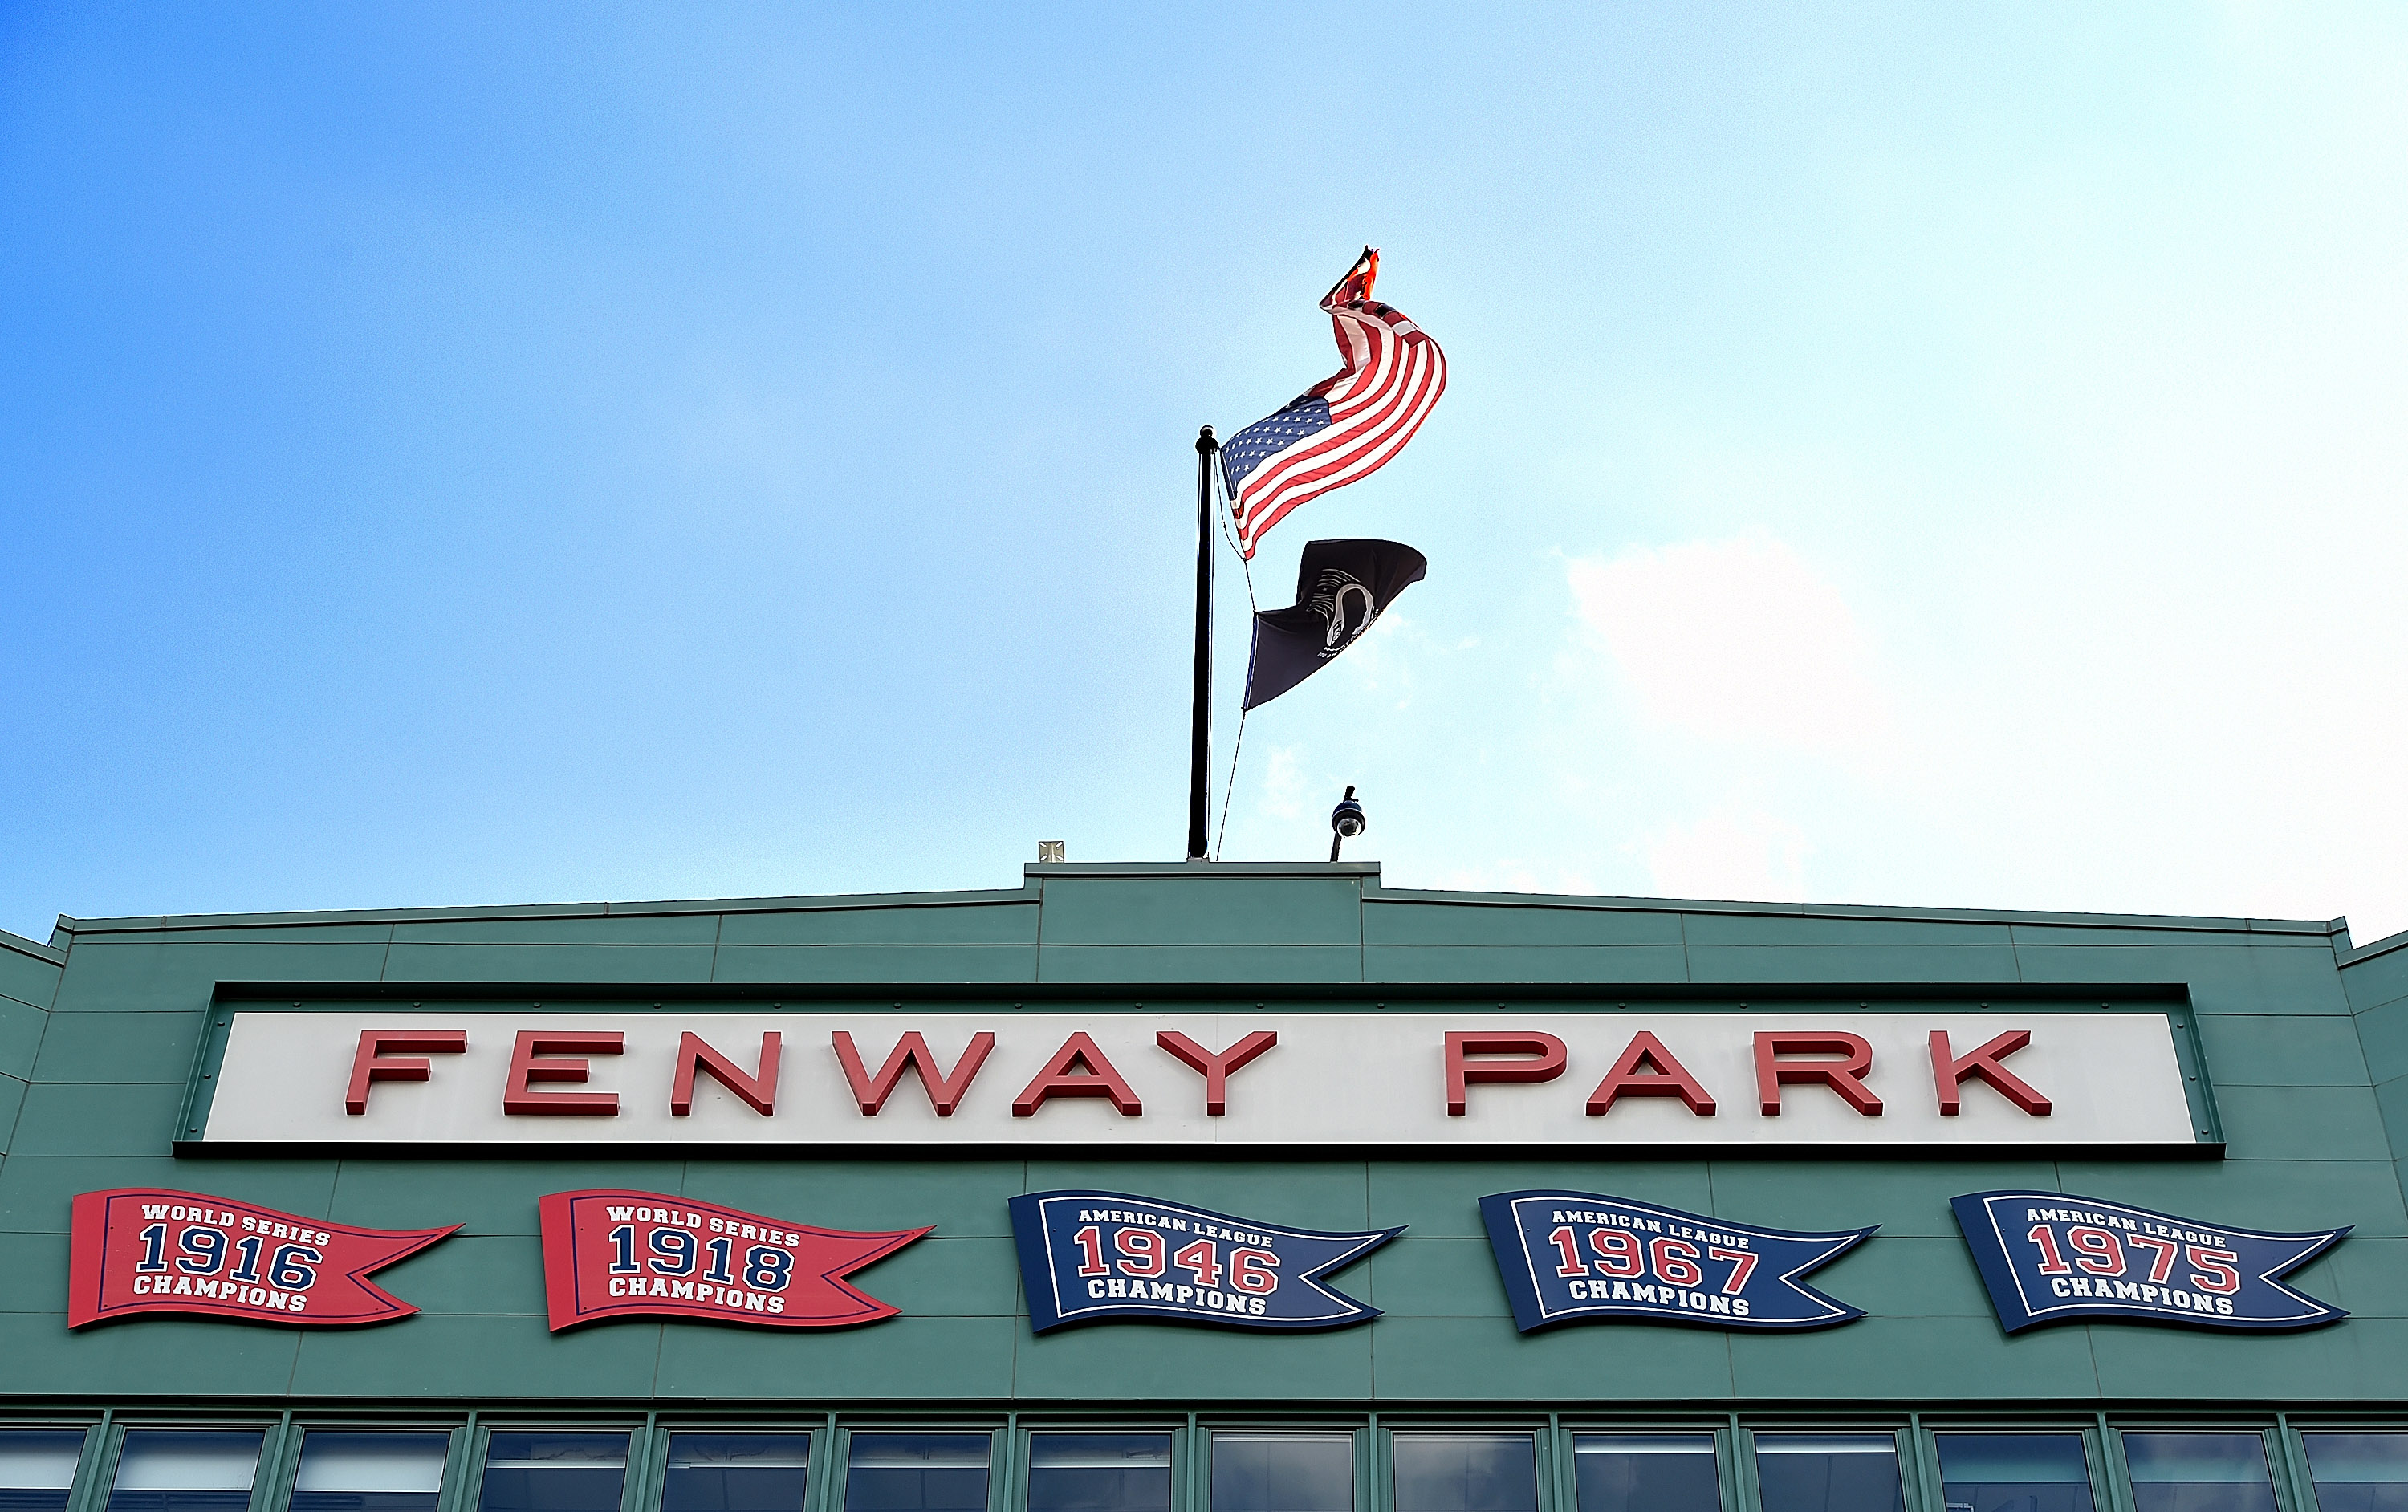 General view  of Fenway Park during a training session at Fenway Park on July 22, 2014 in Boston, Massachusetts. (Andrew Powell&mdash;Liverpool FC via Getty Images)